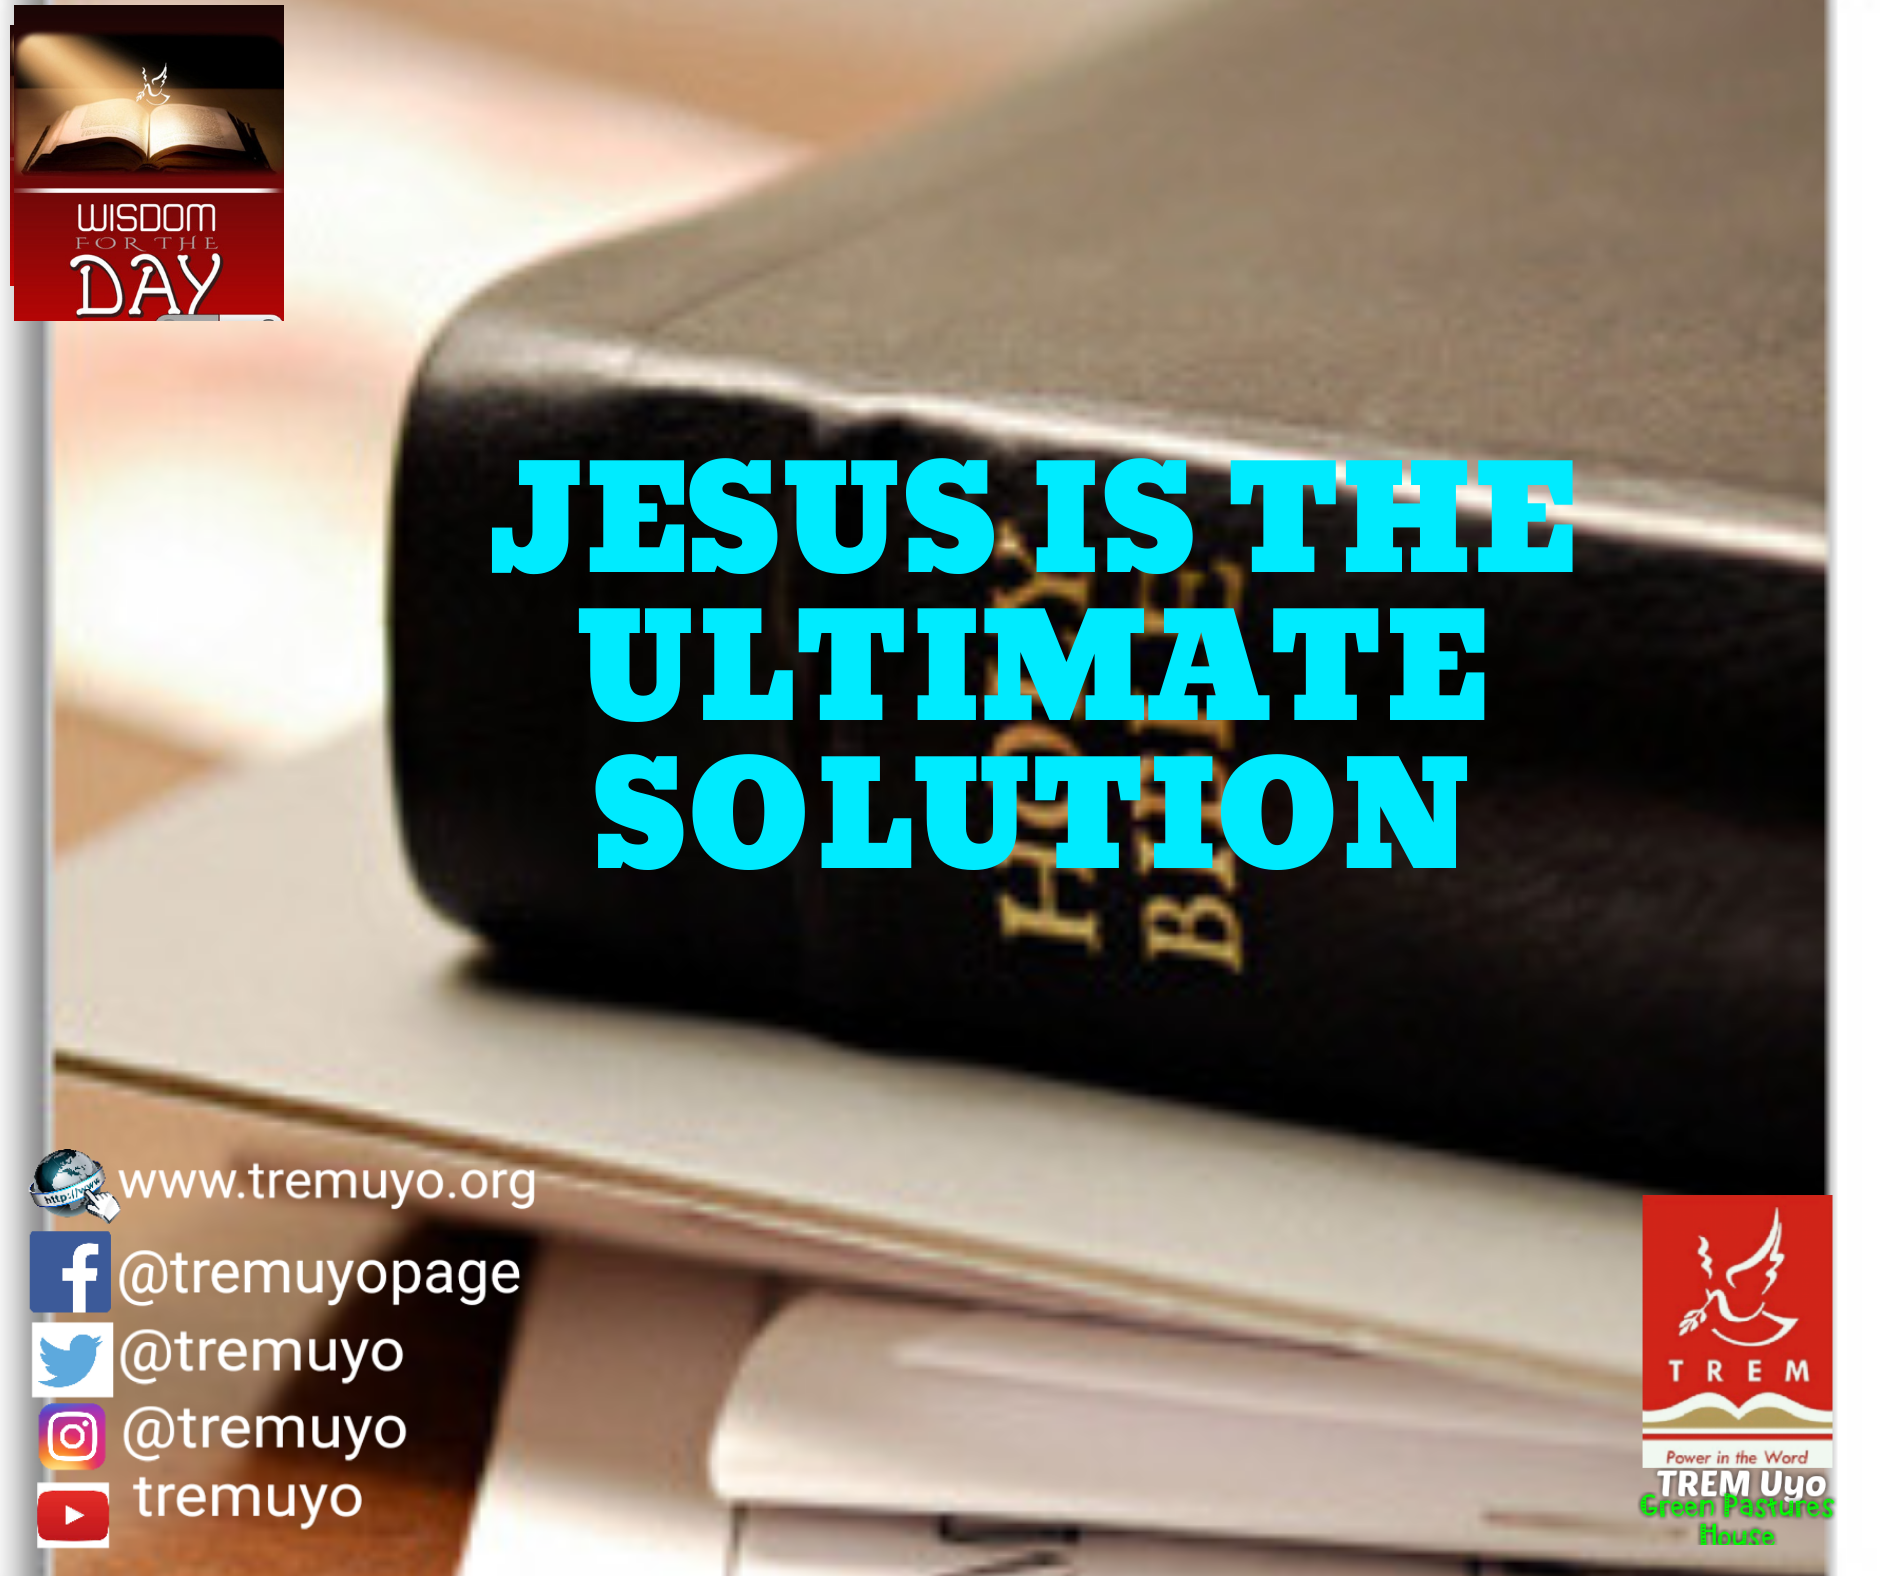 JESUS IS THE ULTIMATE SOLUTION